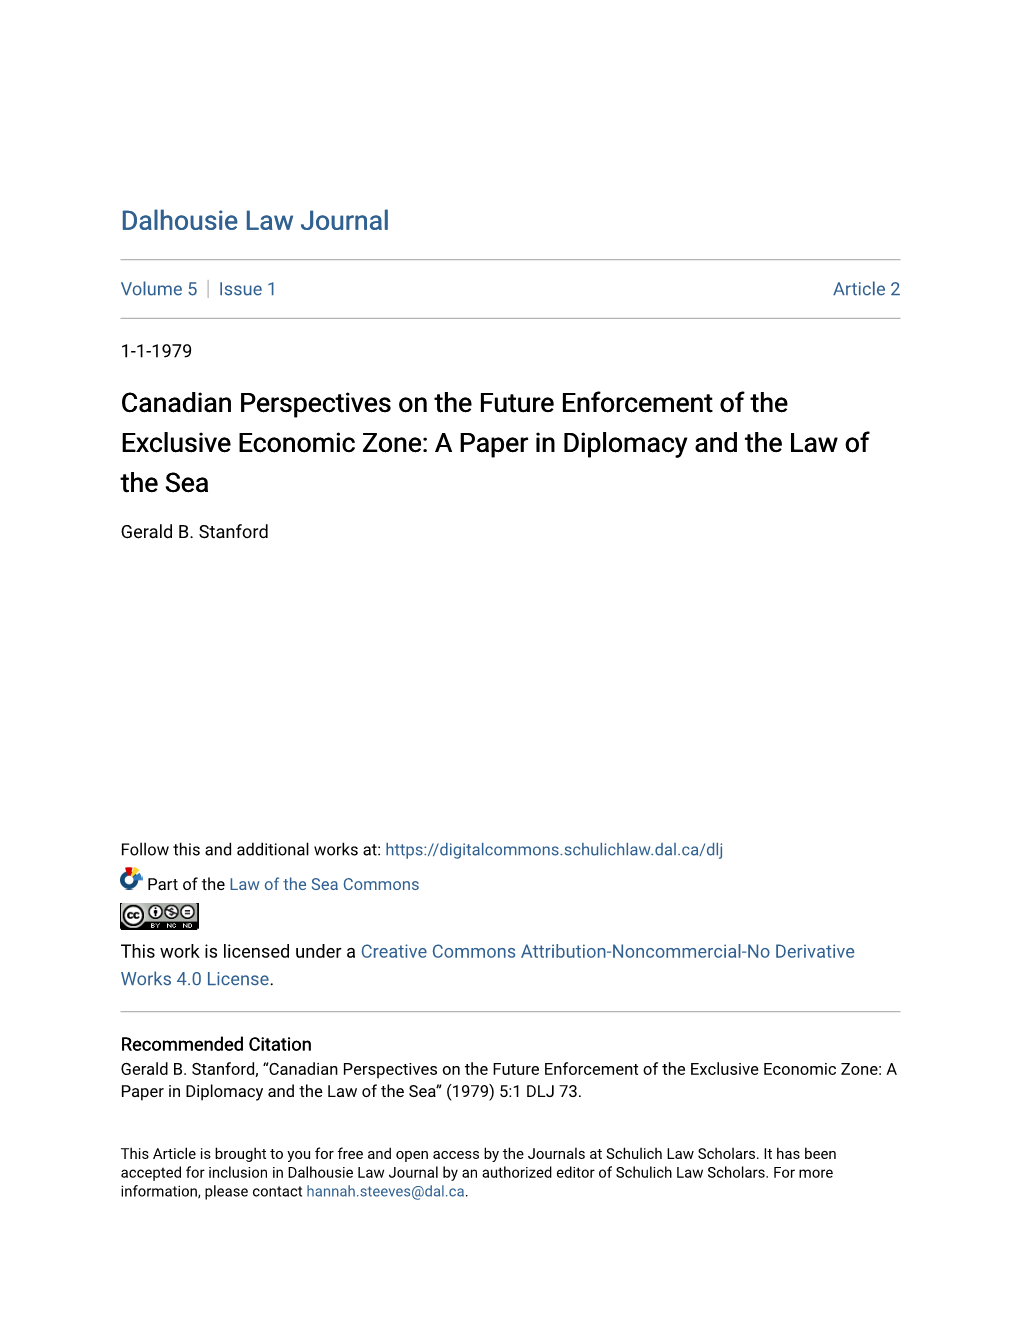 Canadian Perspectives on the Future Enforcement of the Exclusive Economic Zone: a Paper in Diplomacy and the Law of the Sea